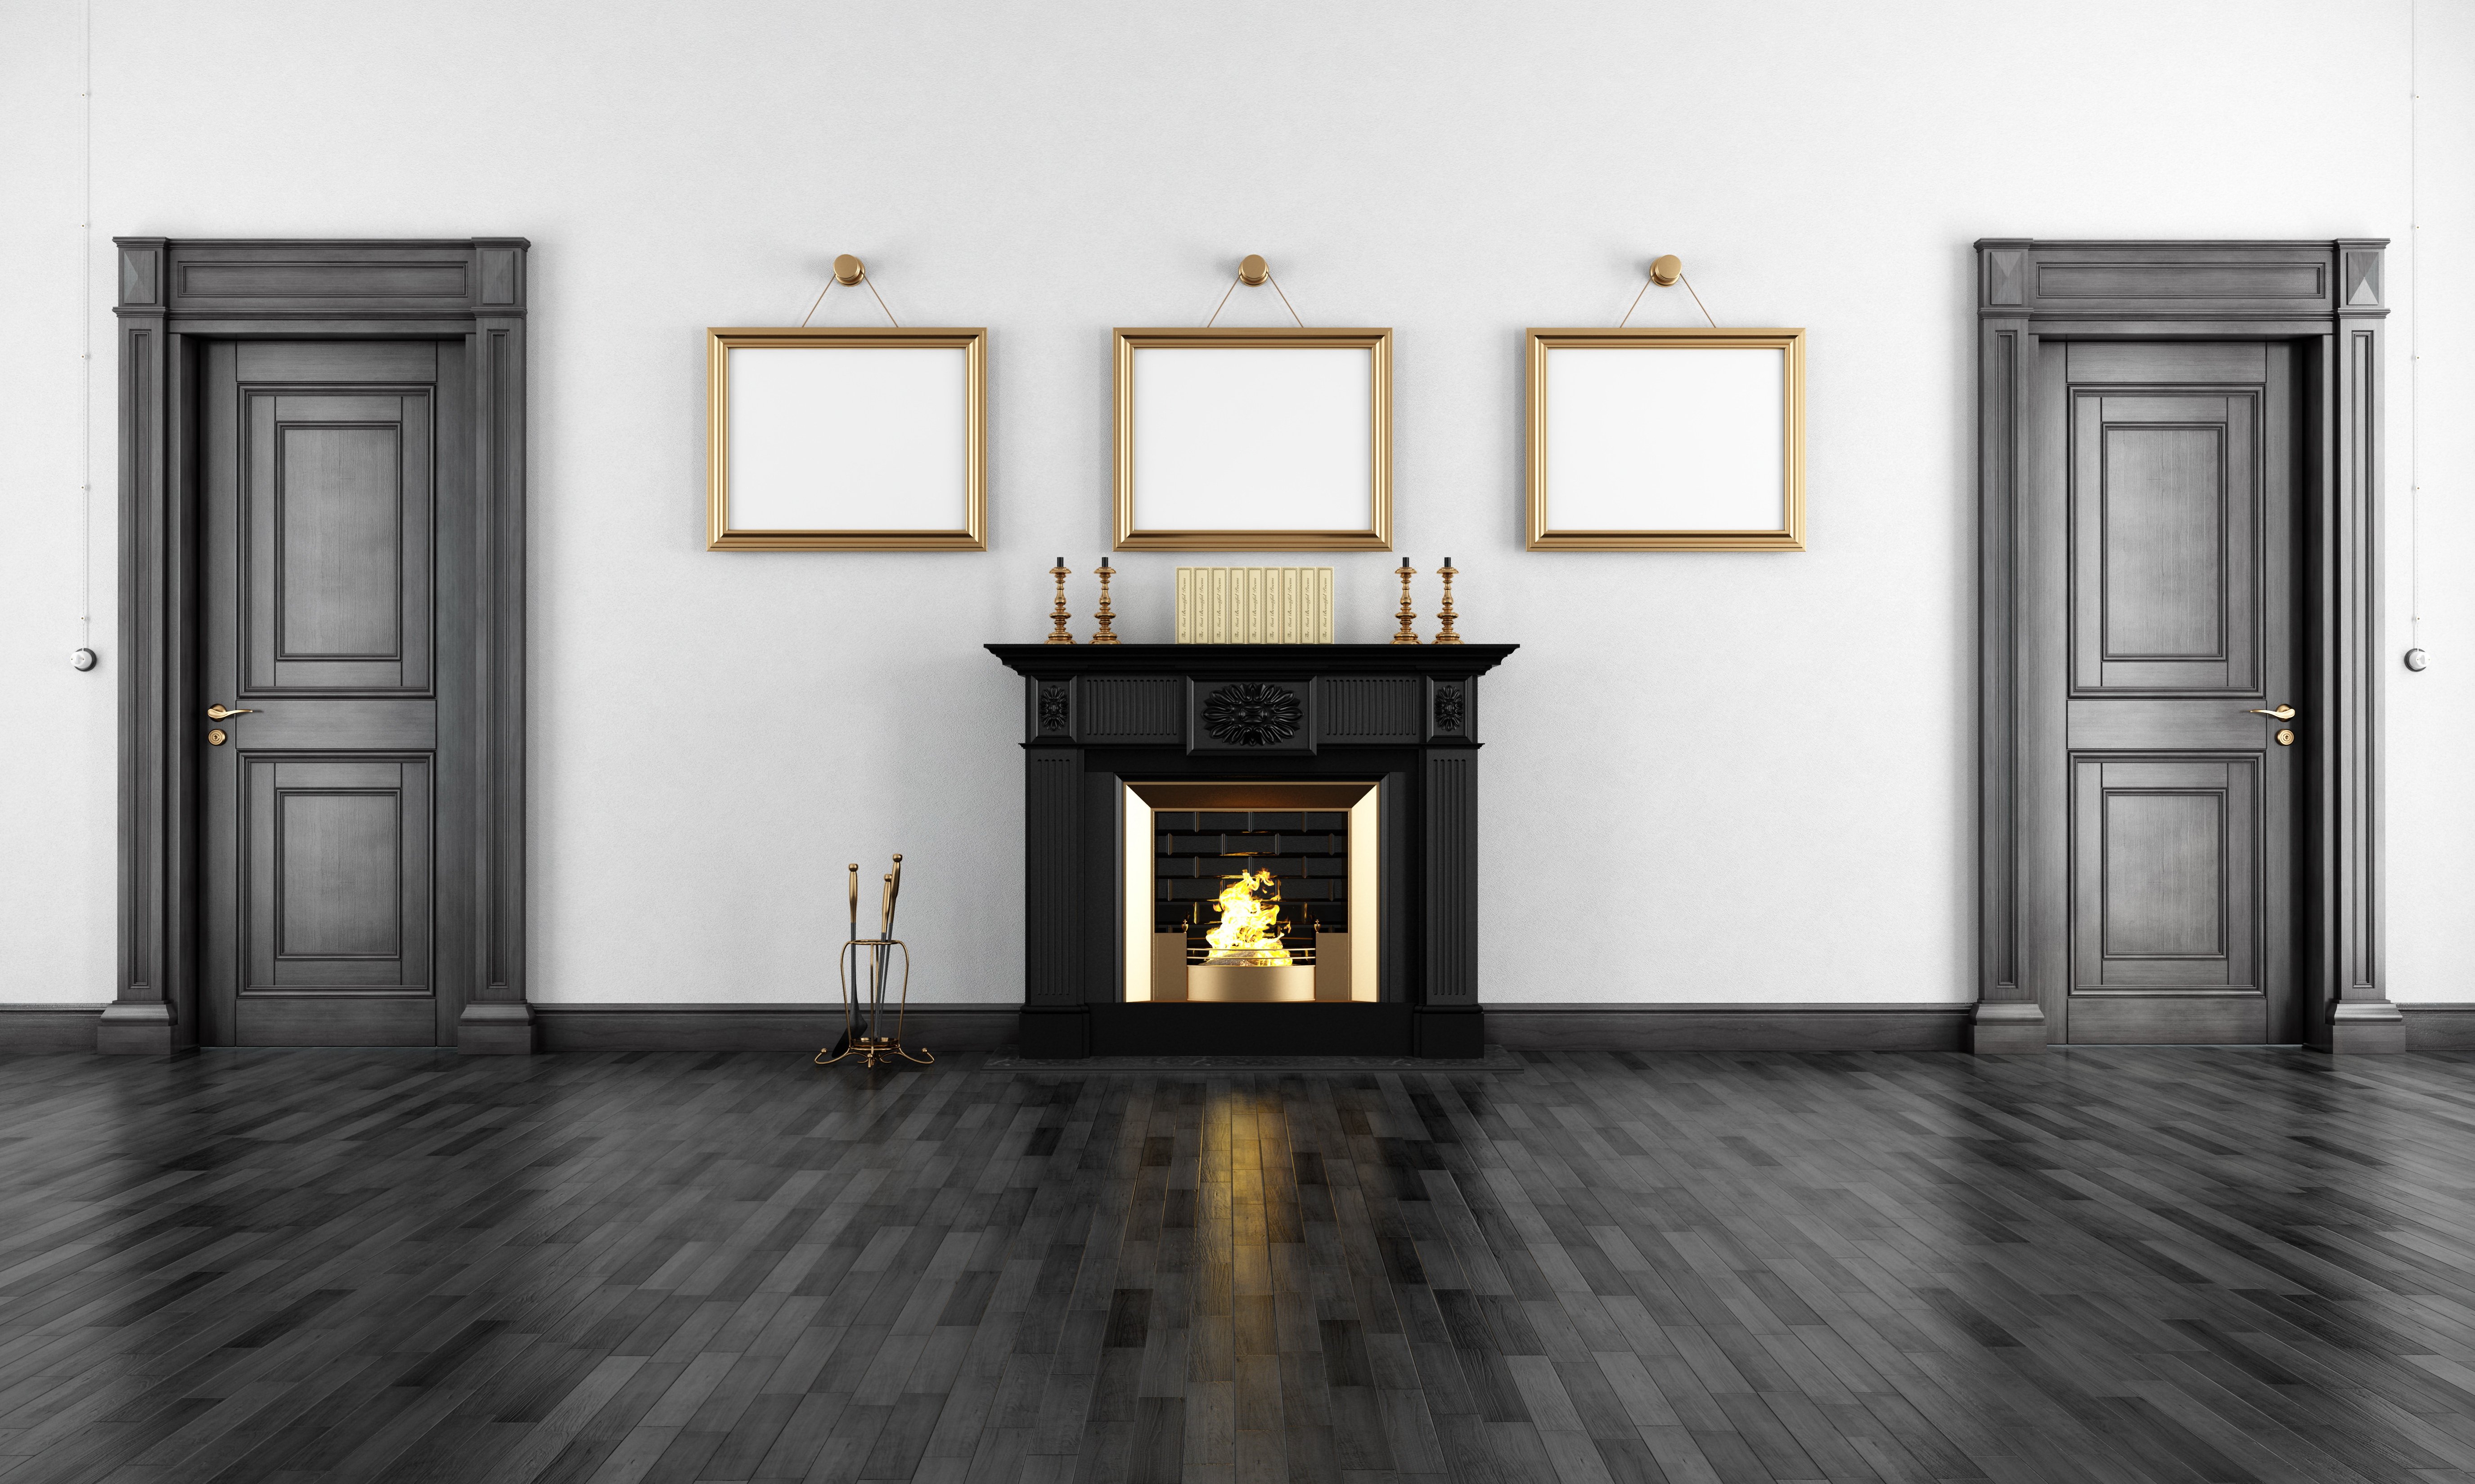 General 5500x3298 interior room wooden surface picture frames fire fireplace black floor picture